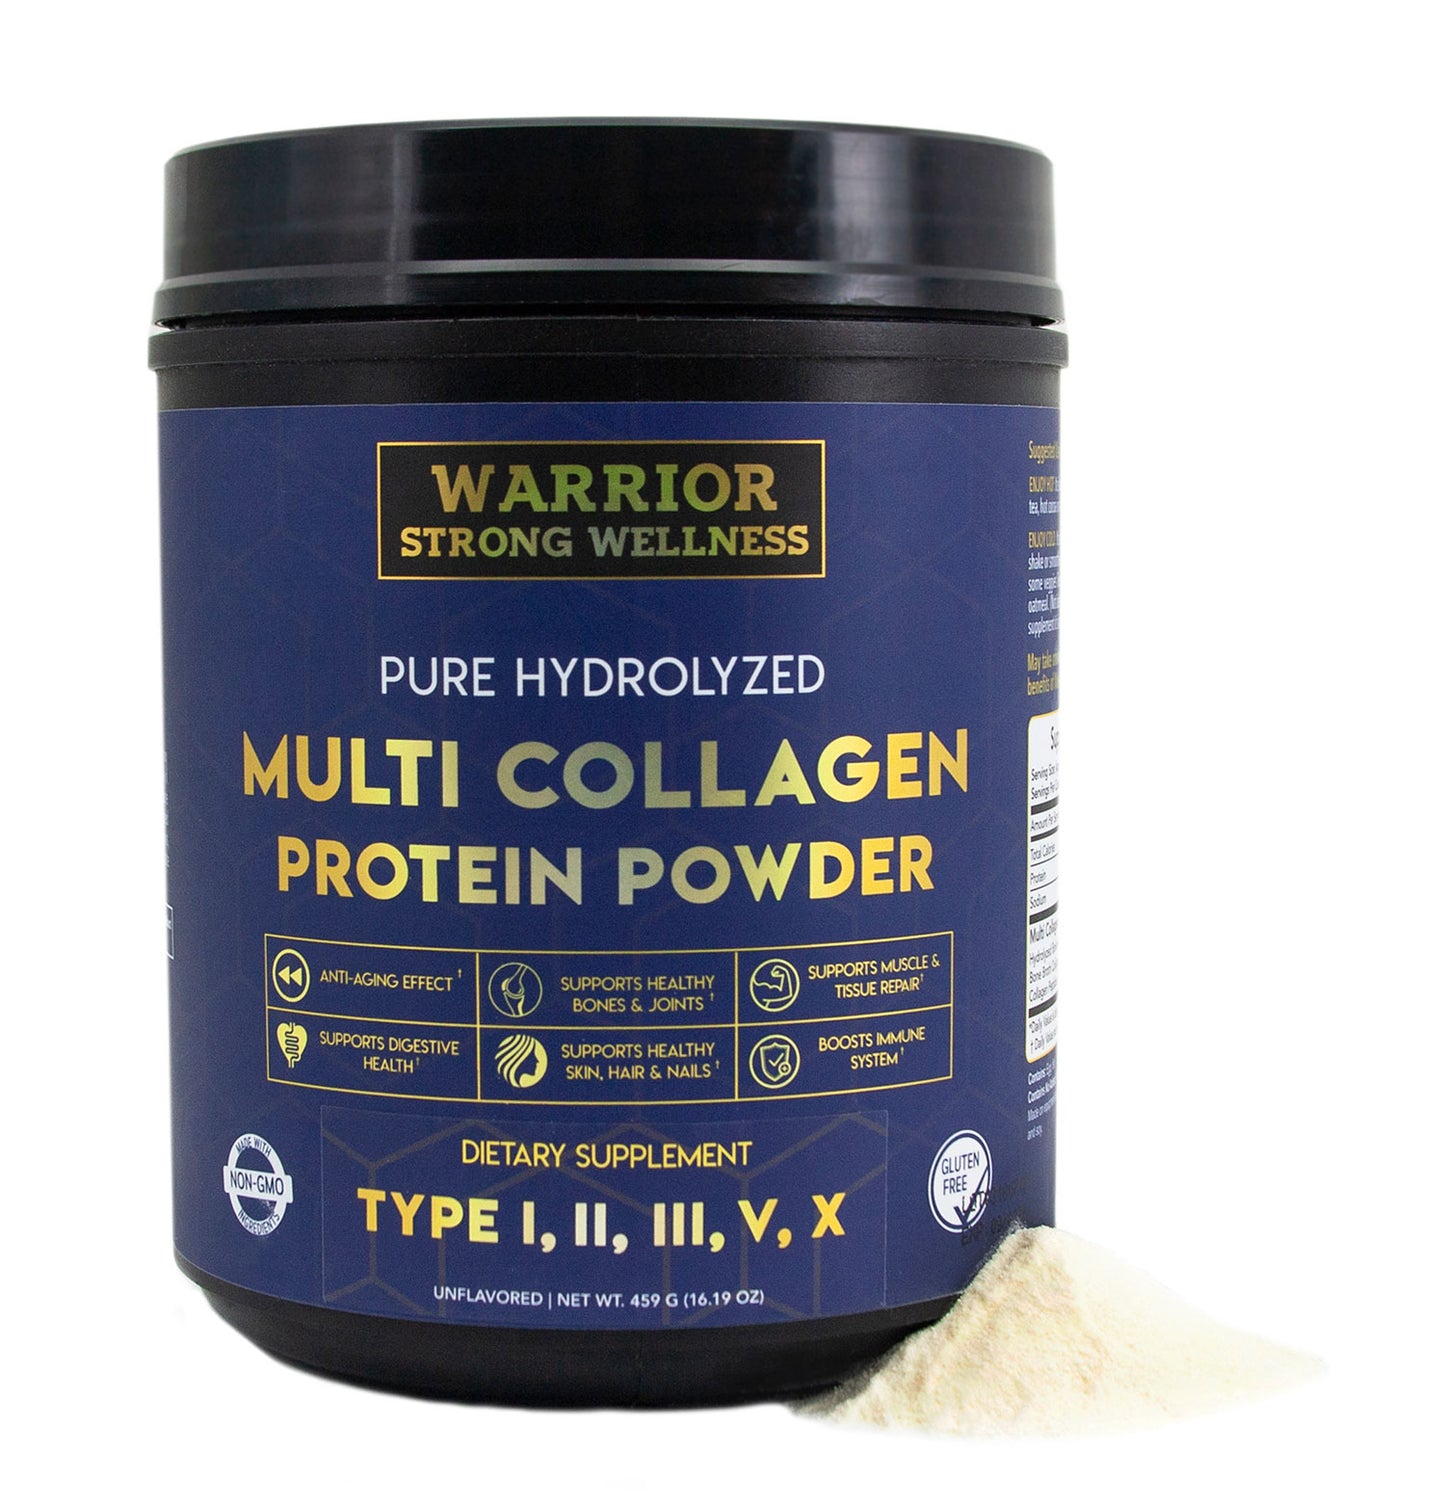 Pure Hydrolyzed Multi Collagen Protein Powder -Supports Healthy Aging, Skin, Hair, Nails & Bones, Anti-Inflammatory Health